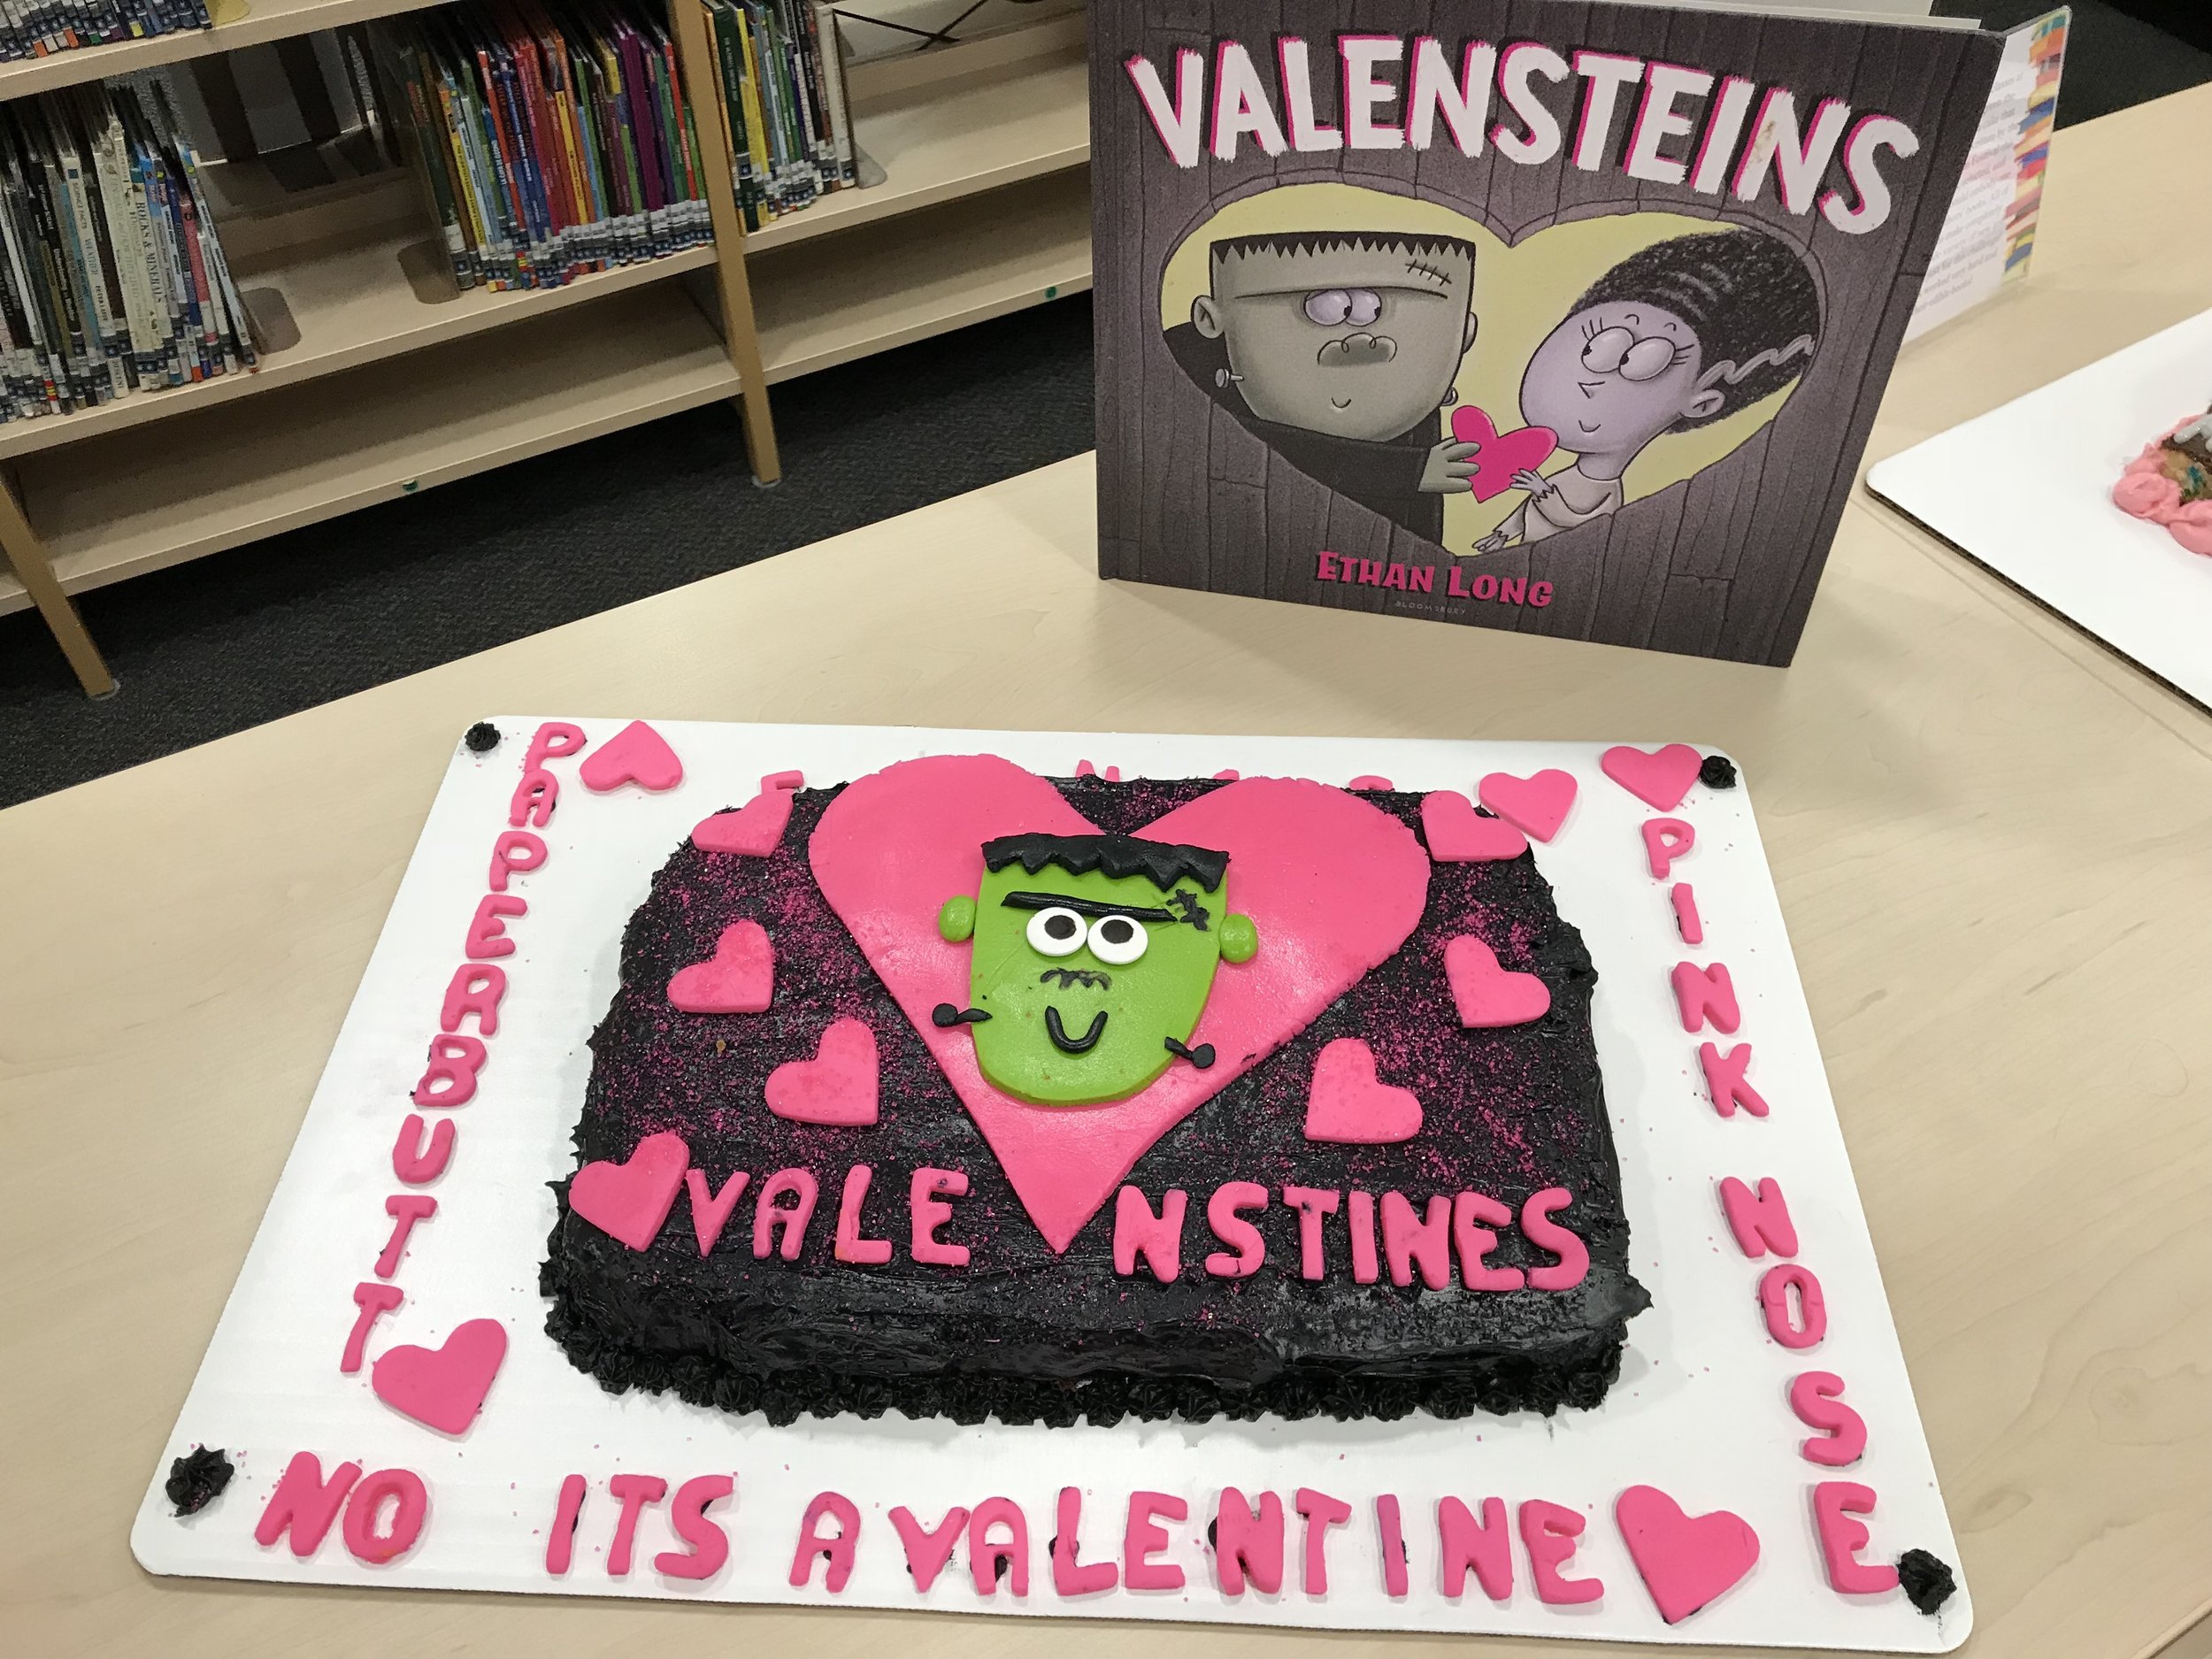 A school loved the book so much, they baked a cake!